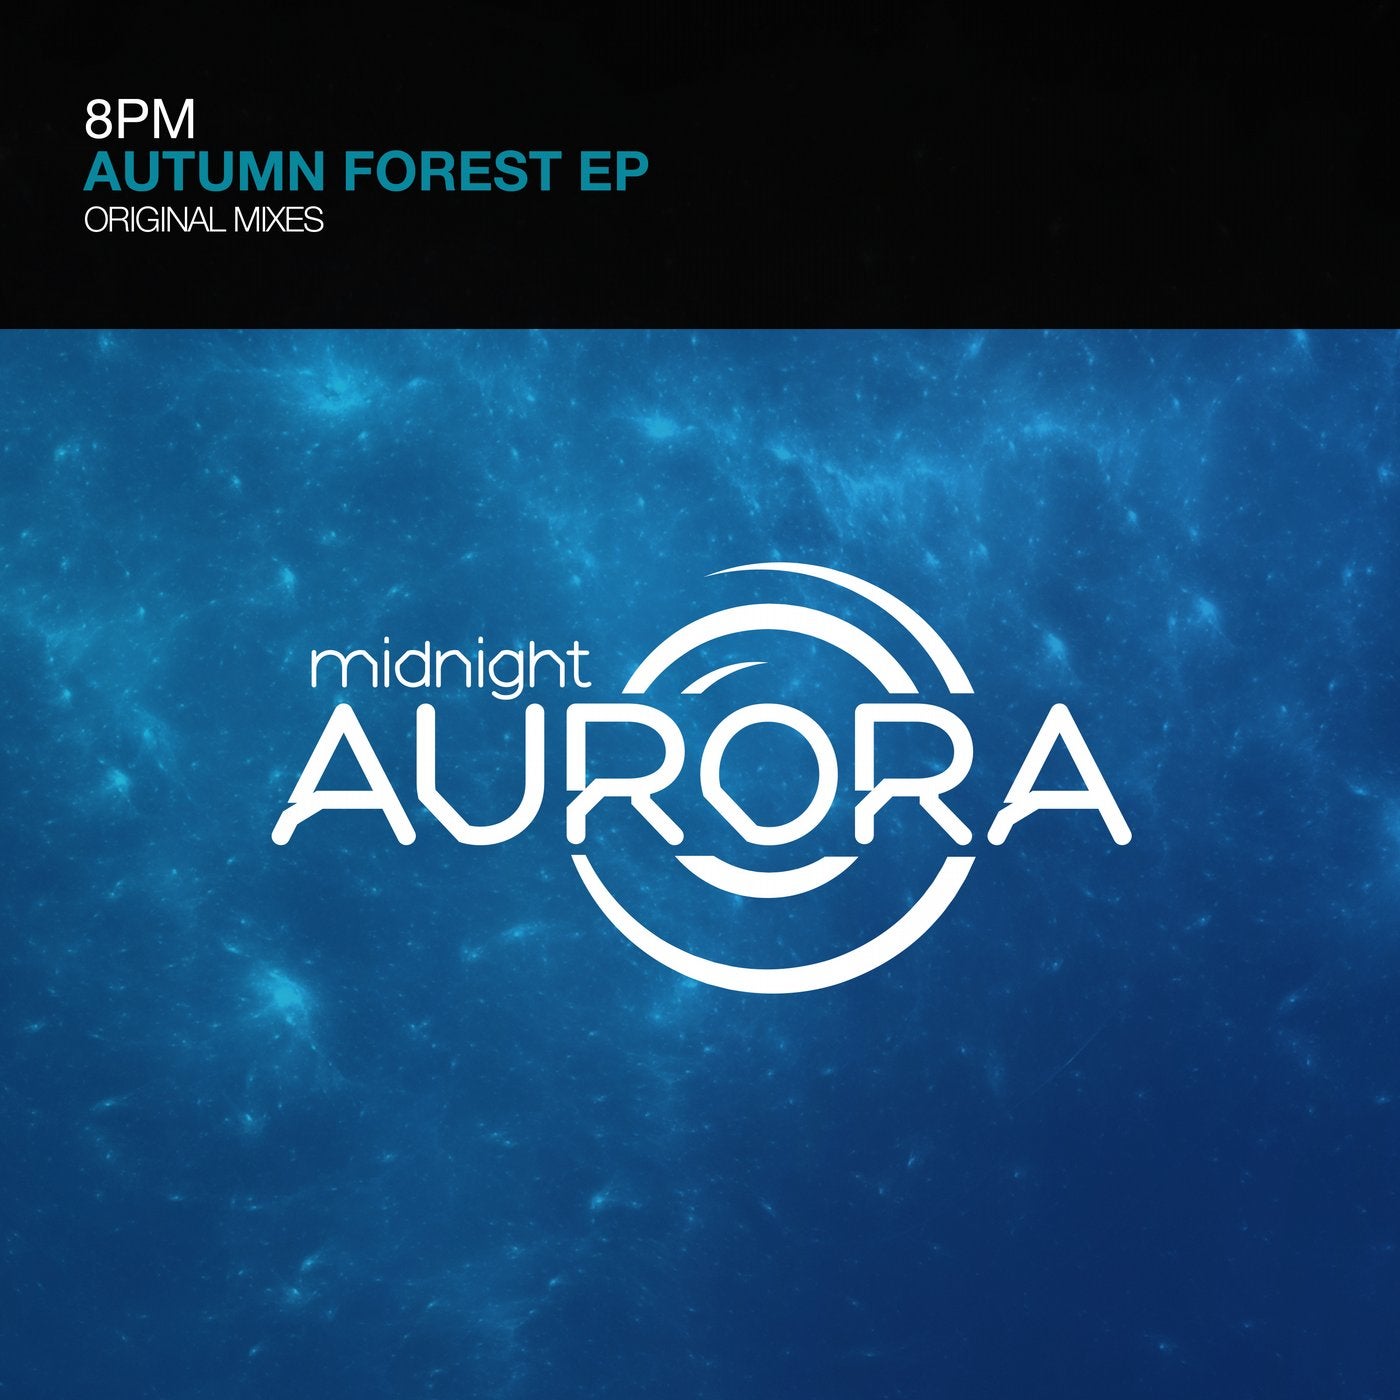 Autumn Forest EP